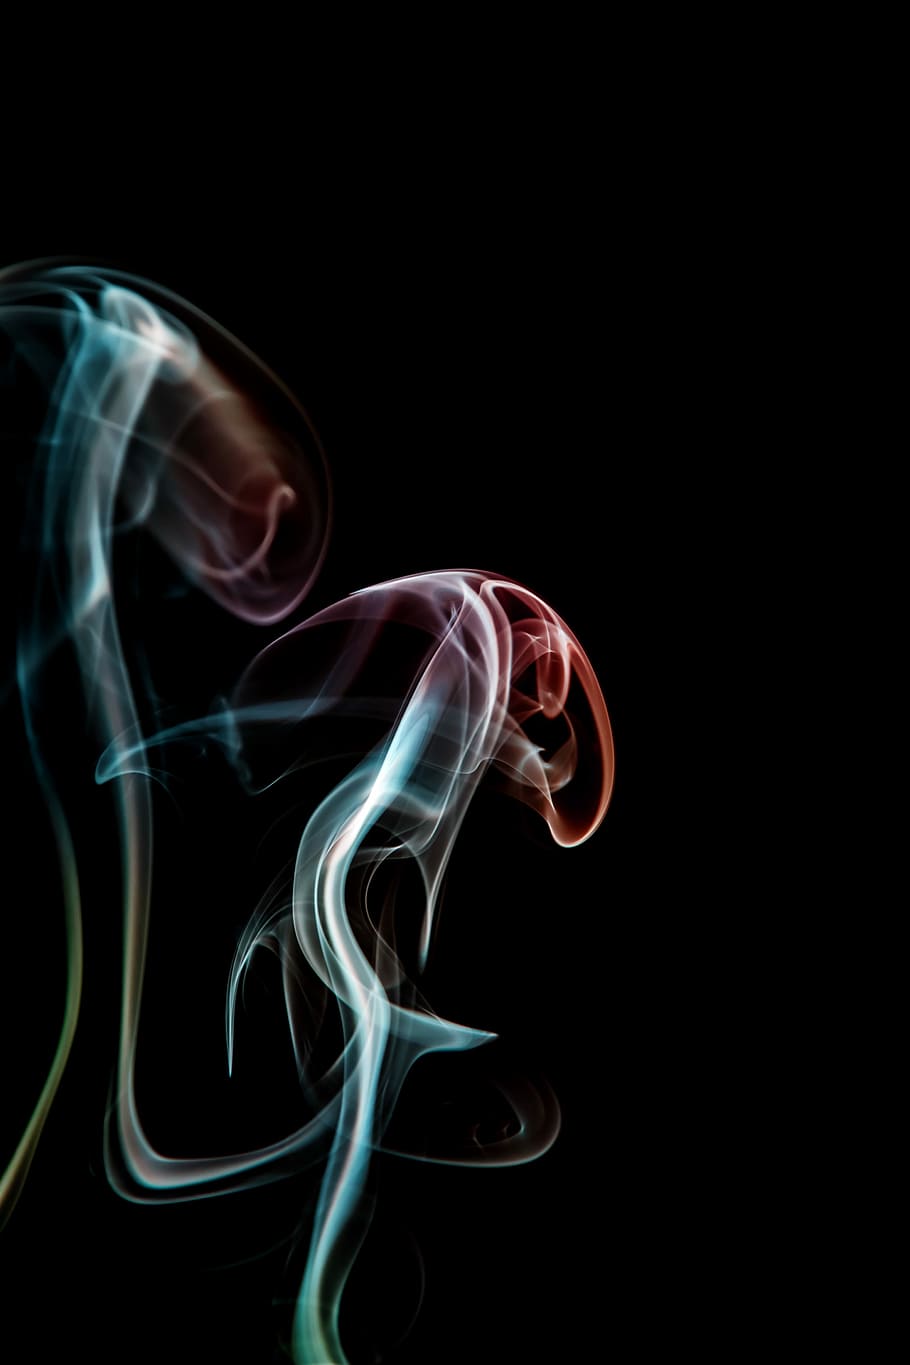 Hd Wallpaper Teal And Red Wallpaper Black Blue And Red Smoke Art Wallpaper Wallpaper Flare